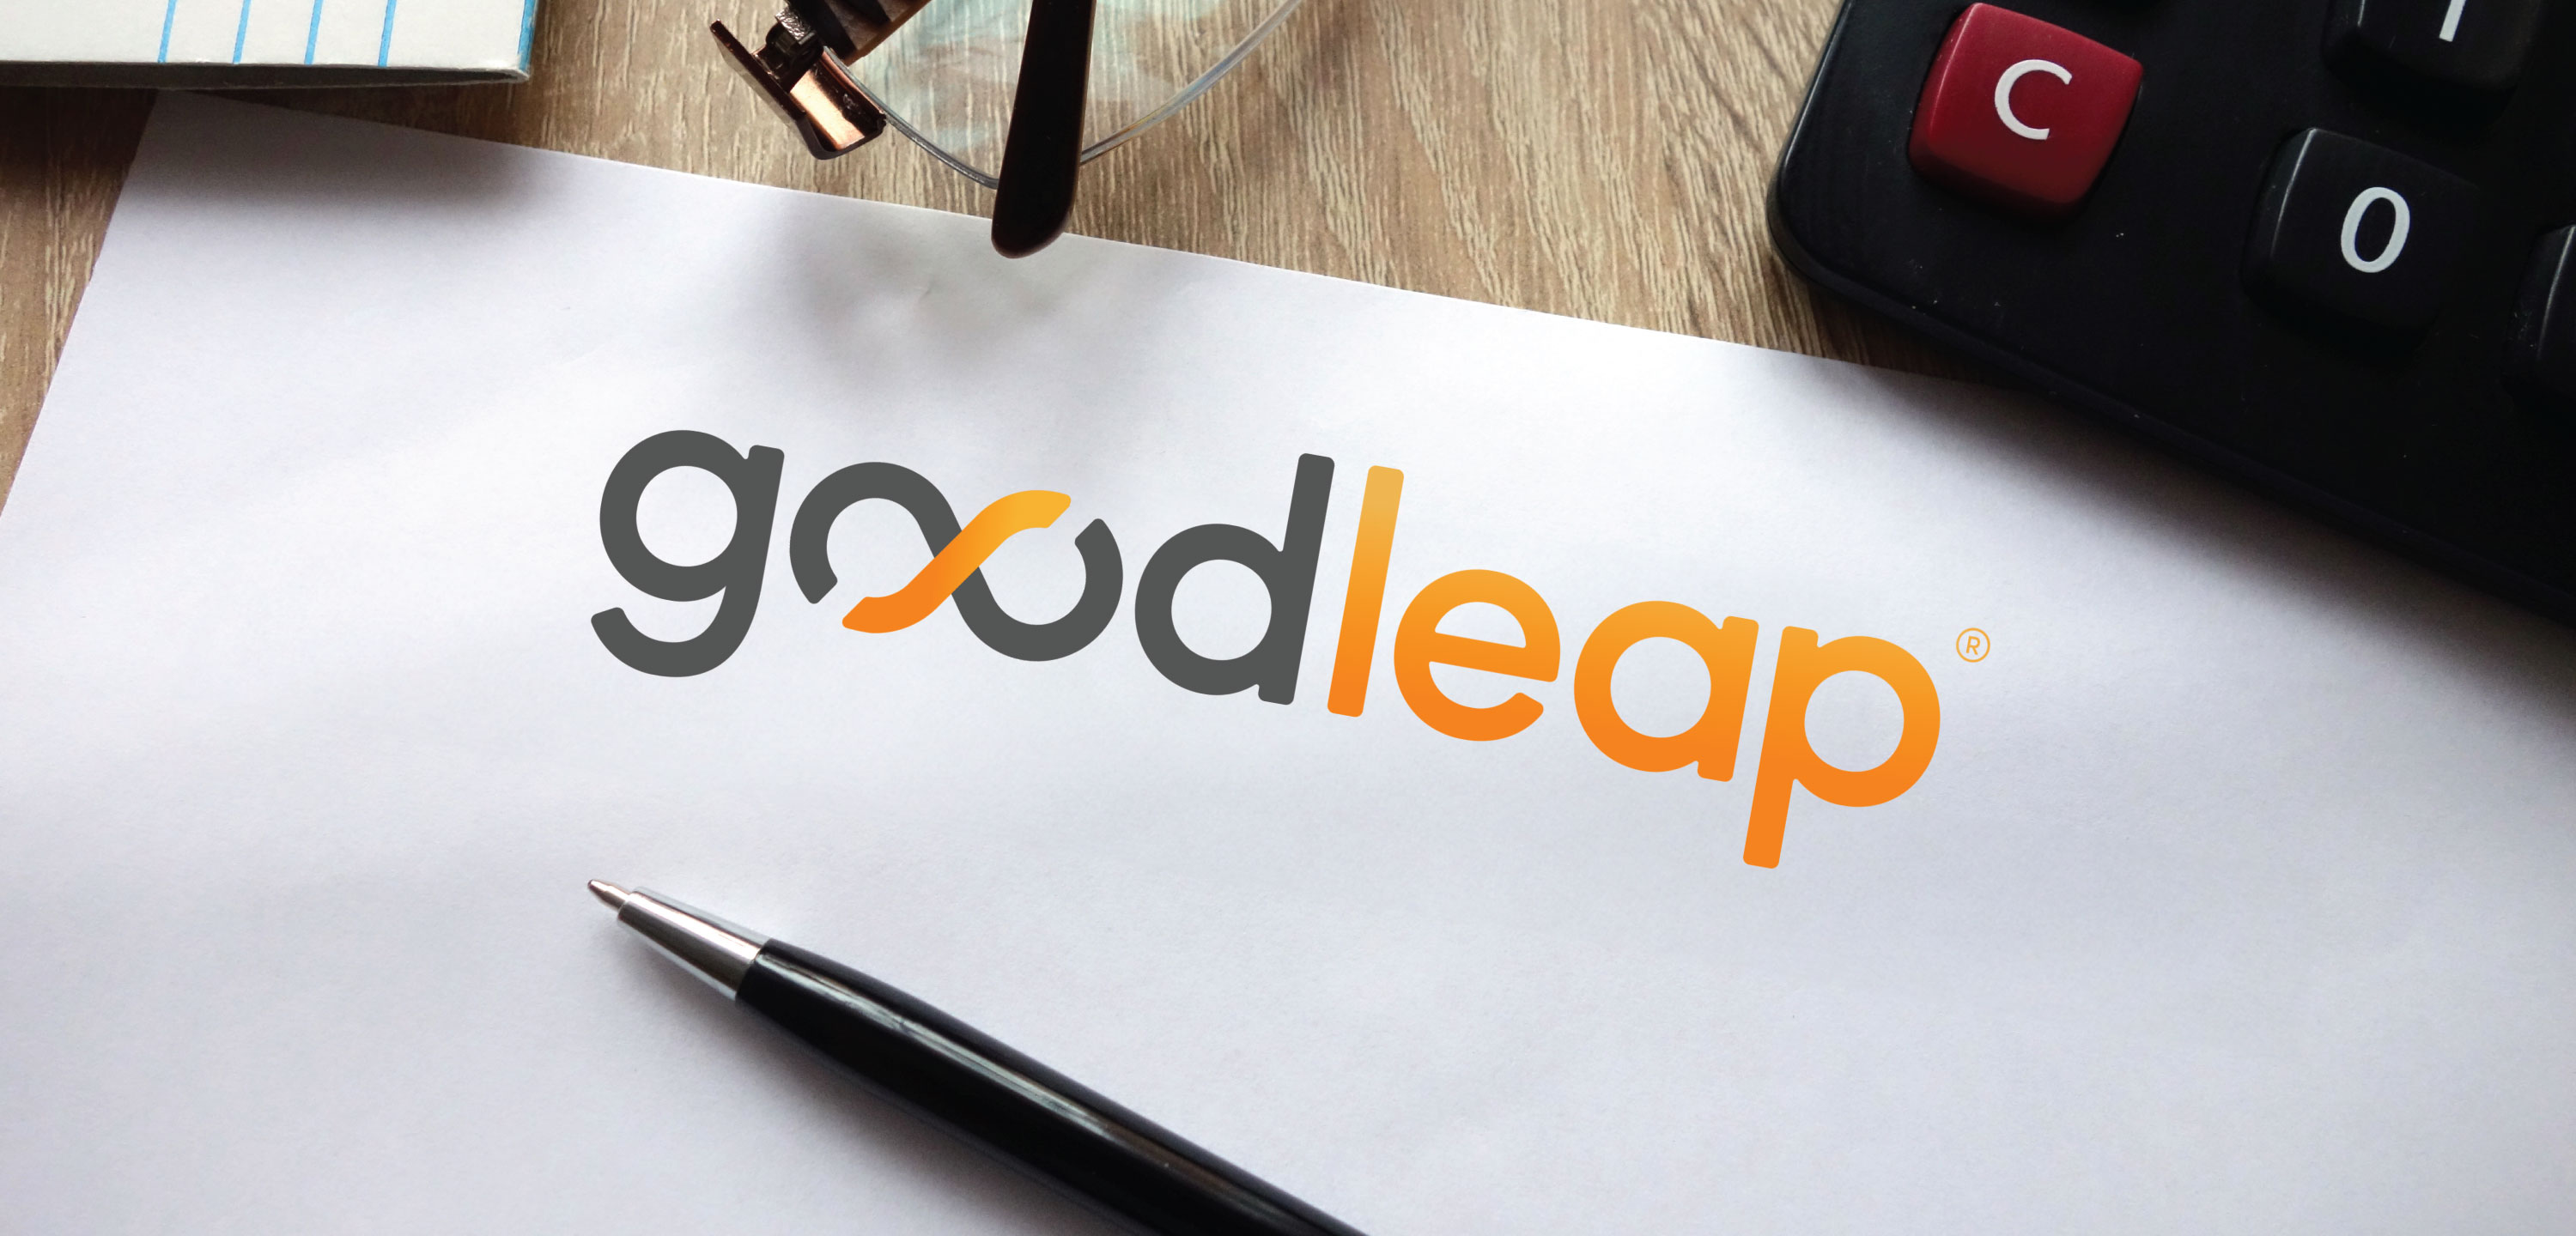 GoodLeap solar loans: What you need to know